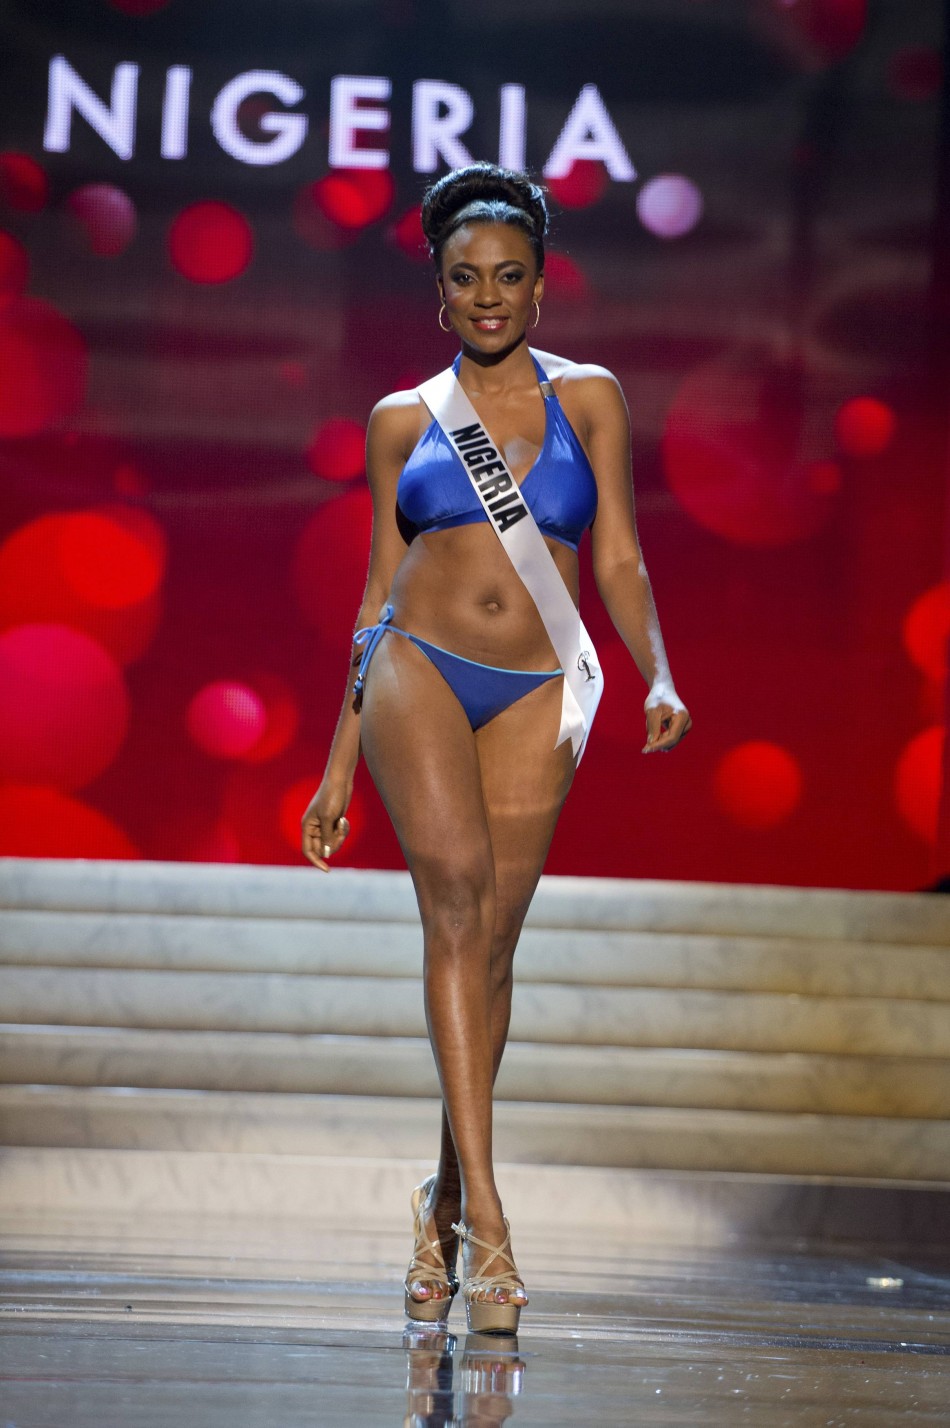 Miss Nigeria Isabella Ayuk at the Swimsuit Competition of the 2012 Miss Universe Presentation Show at PH Live in Las Vegas